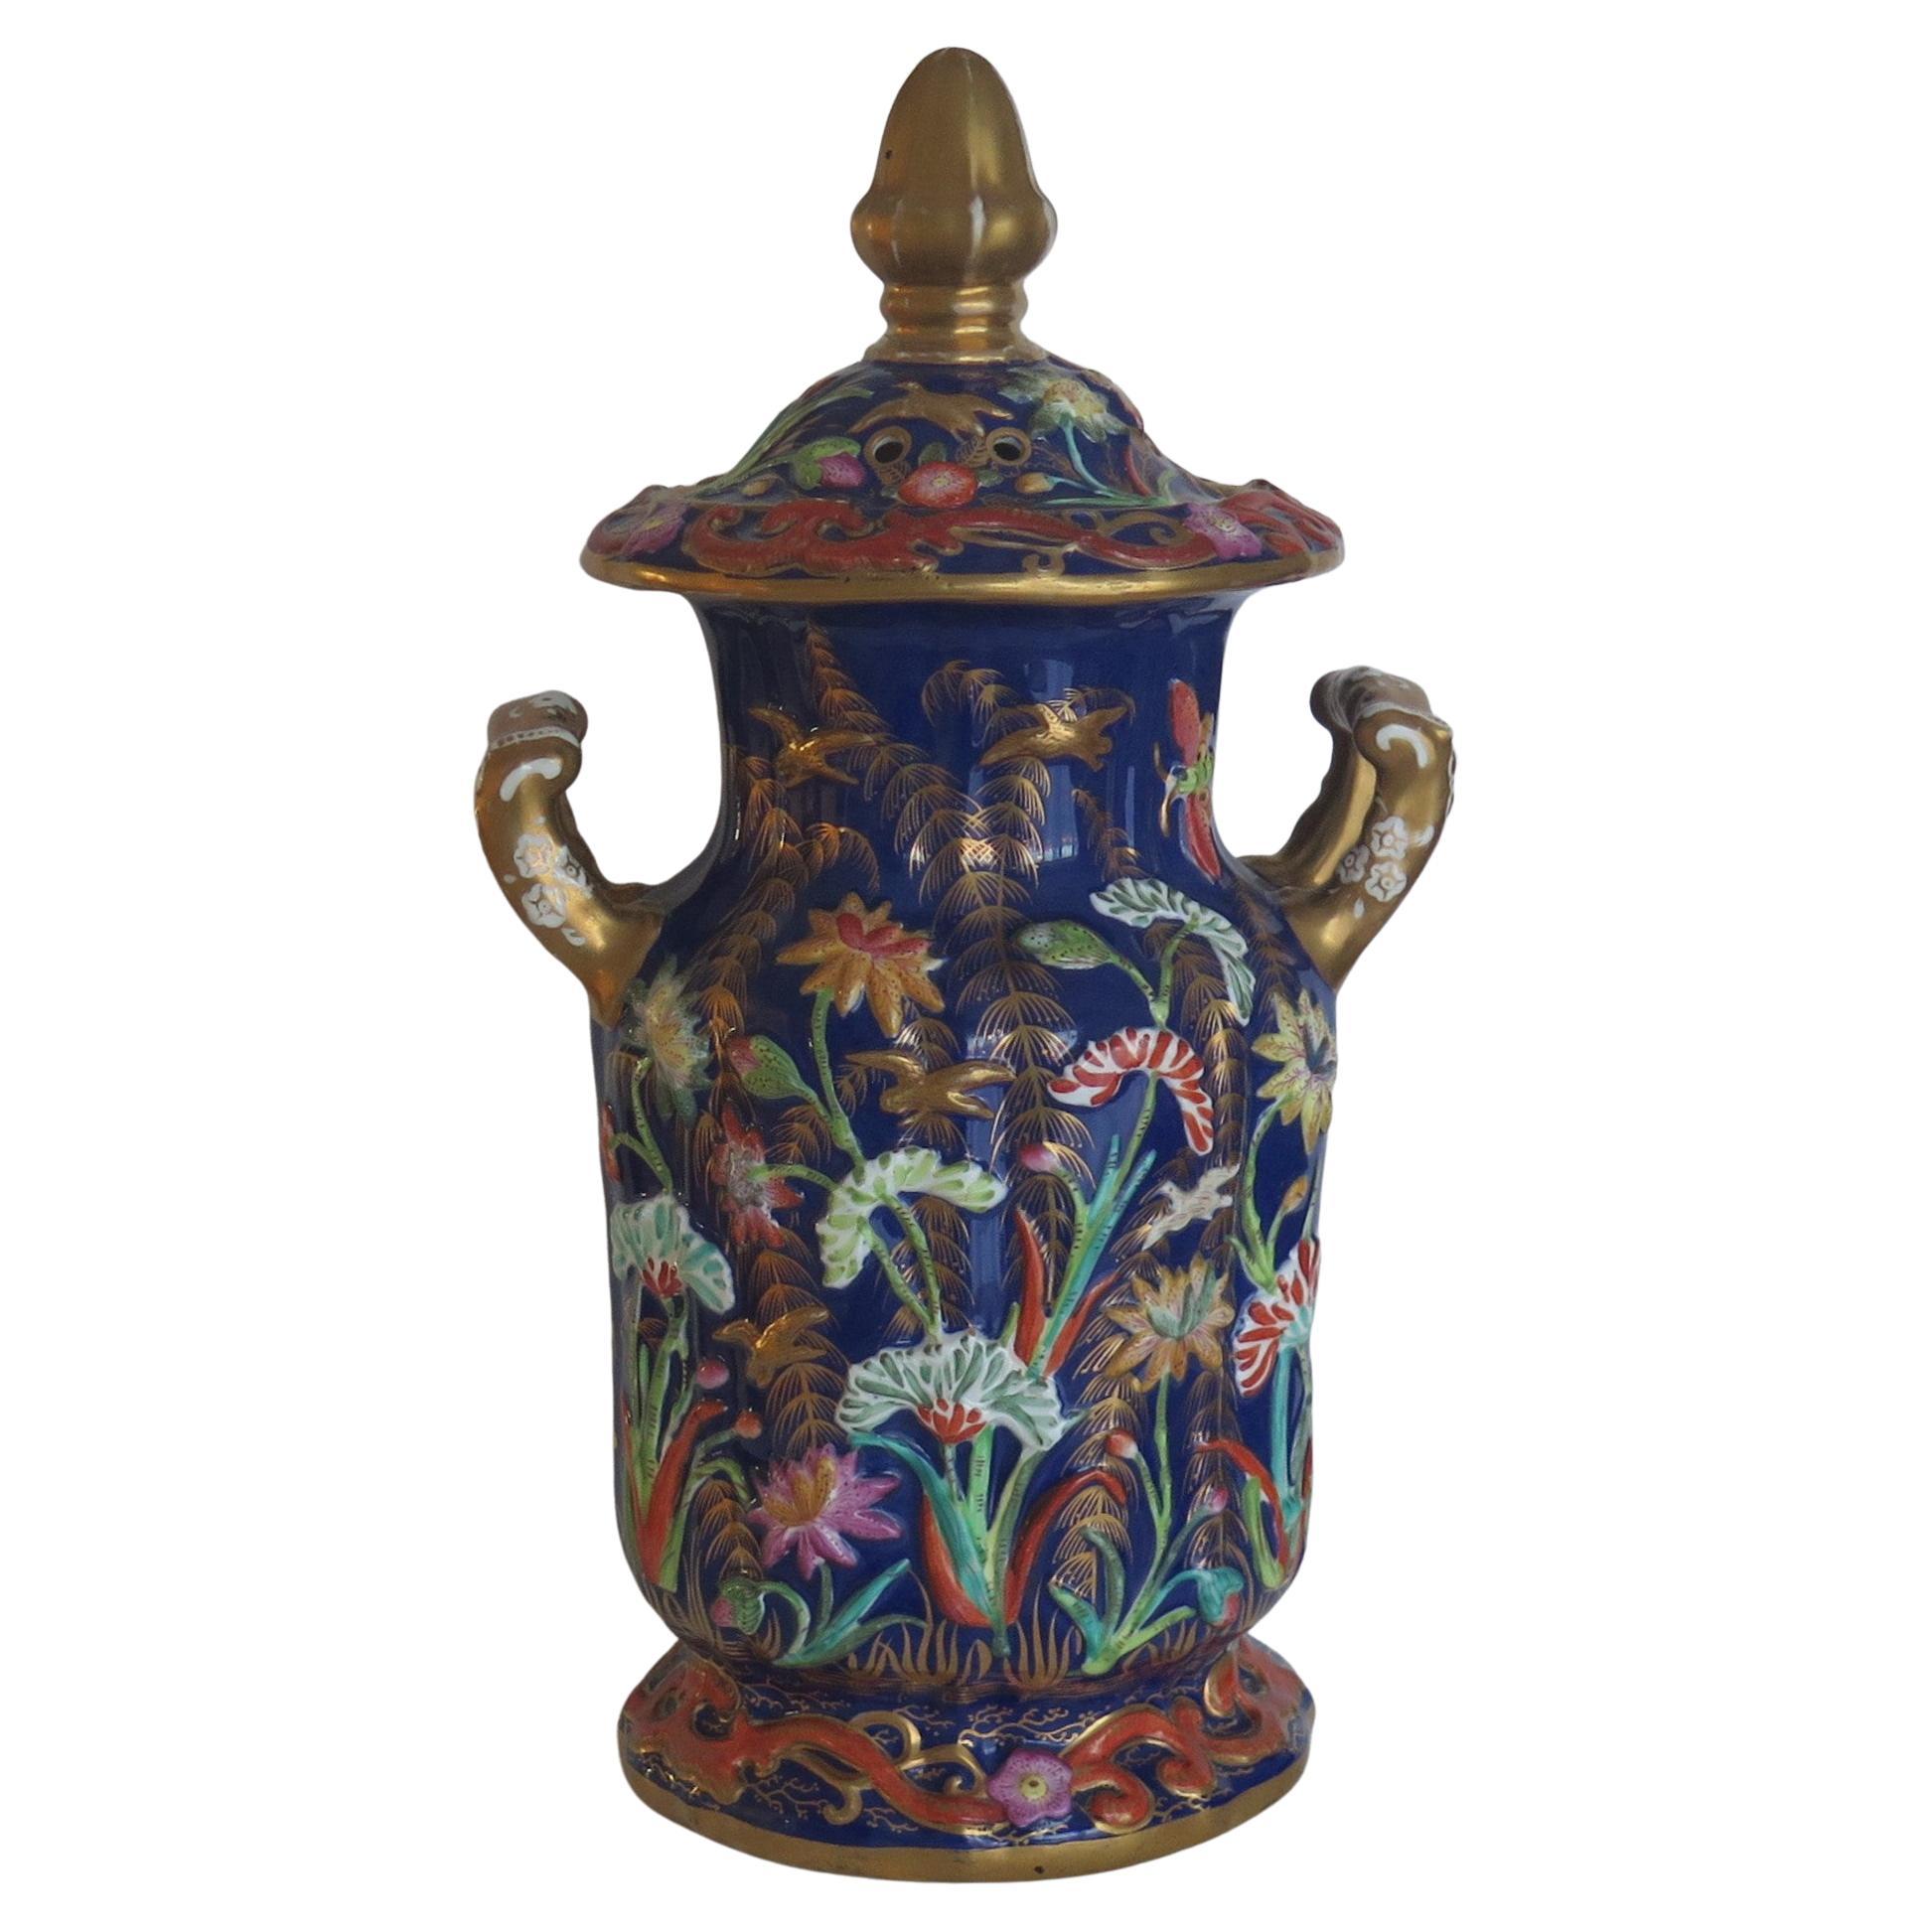 Very Large Masons Ironstone Covered Vase with rare Relief Motifs, Circa 1825